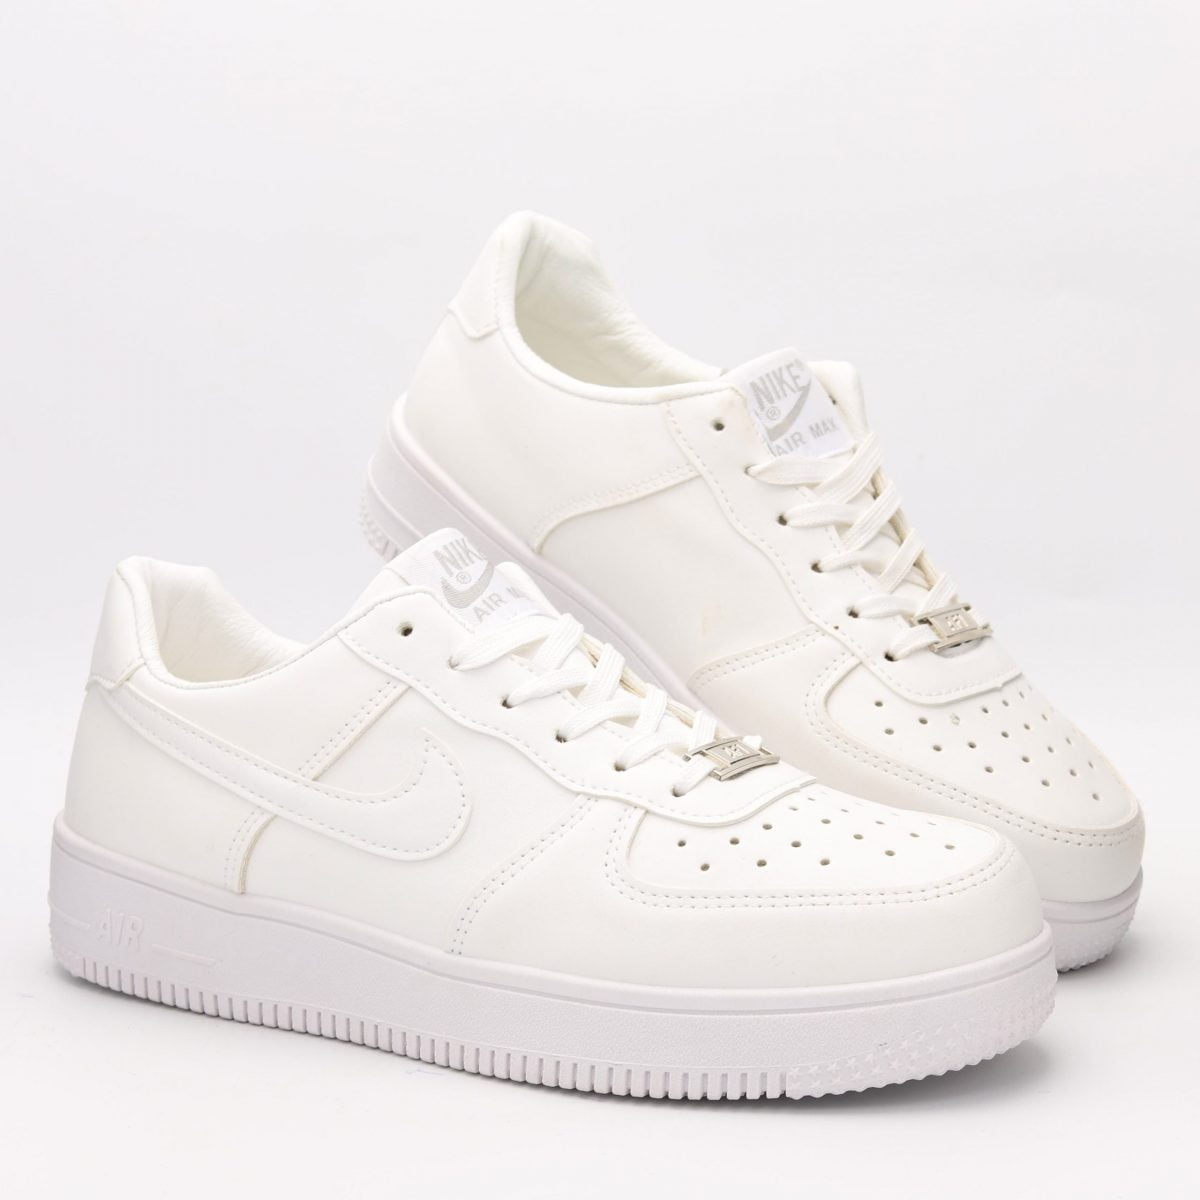 1677510635 white20sneakers20shoes11795 1 scaled